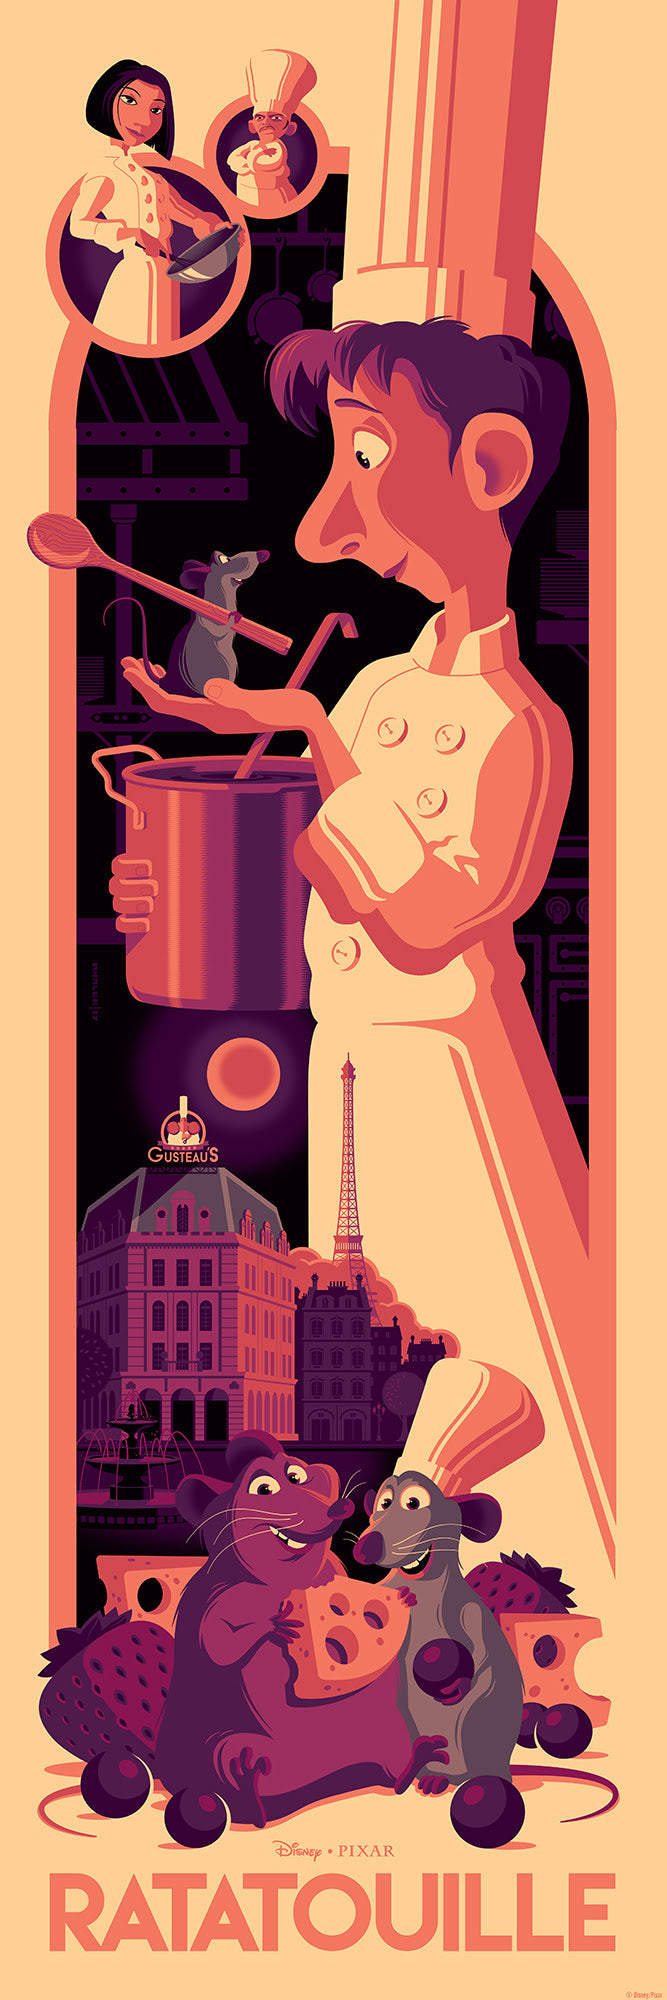 Cyclops Print Works Print # 76V - Ratatouille "Midnight in Paris" Edition by Tom Whalen